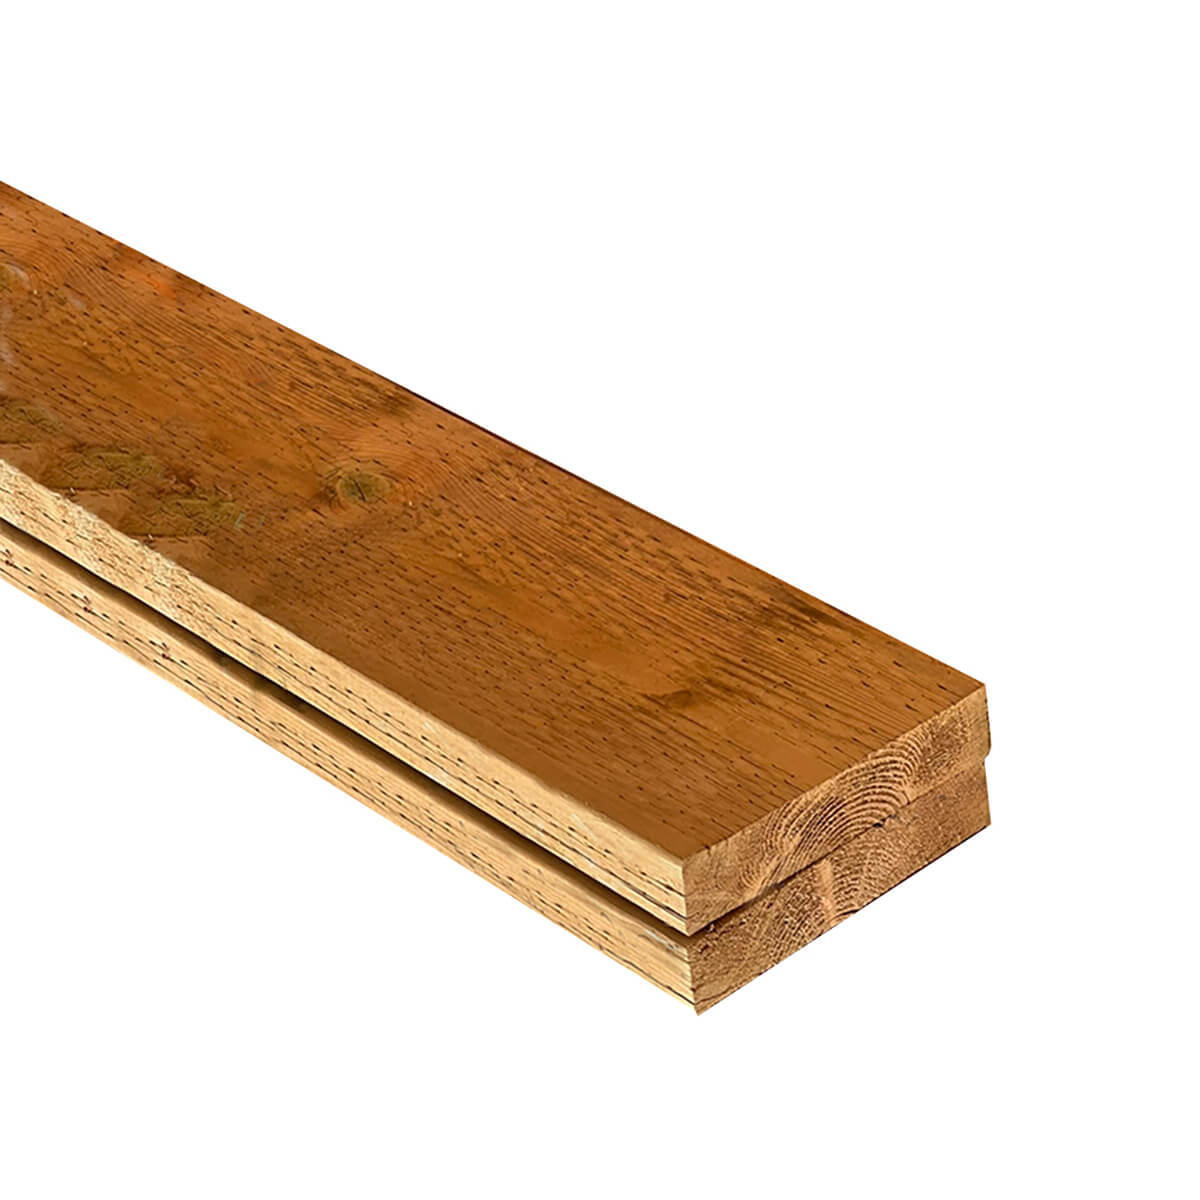 Treated Ground Contact Lumber - P/T - .40 - 2 x 8 x 16-ft